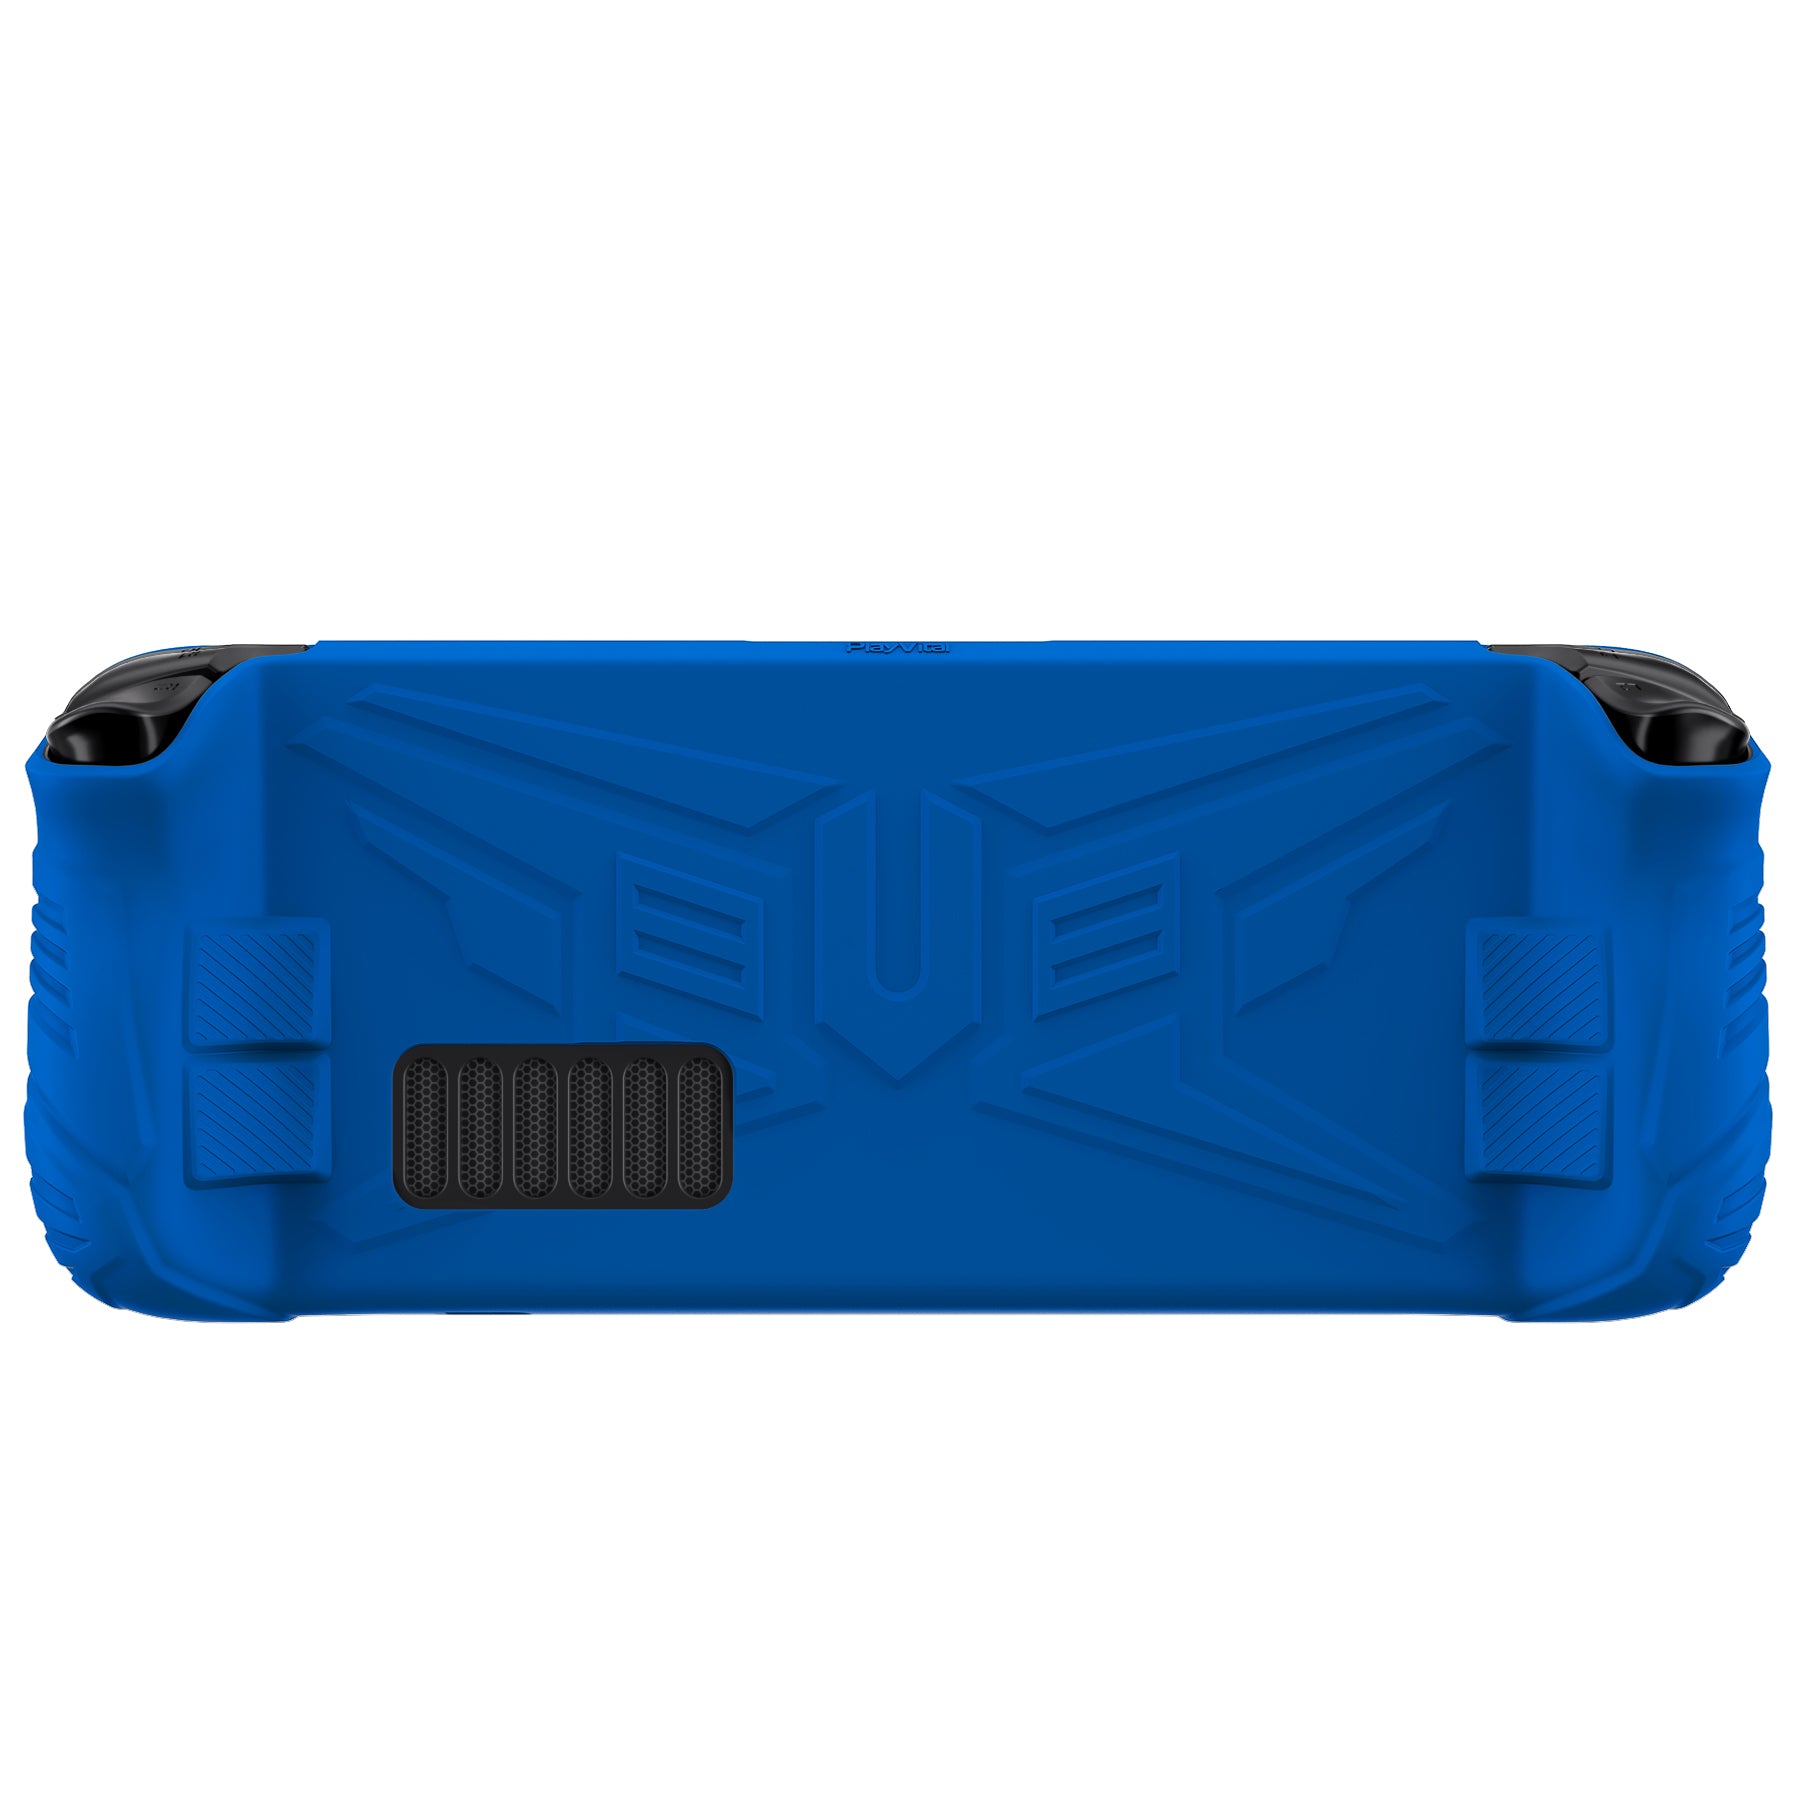 PlayVital Armor Series Protective Case for Steam Deck LCD, Soft Cover Silicone Protector for Steam Deck with Back Button Enhancement Designed & Thumb Grips Caps - Blue - XFSDP006 PlayVital